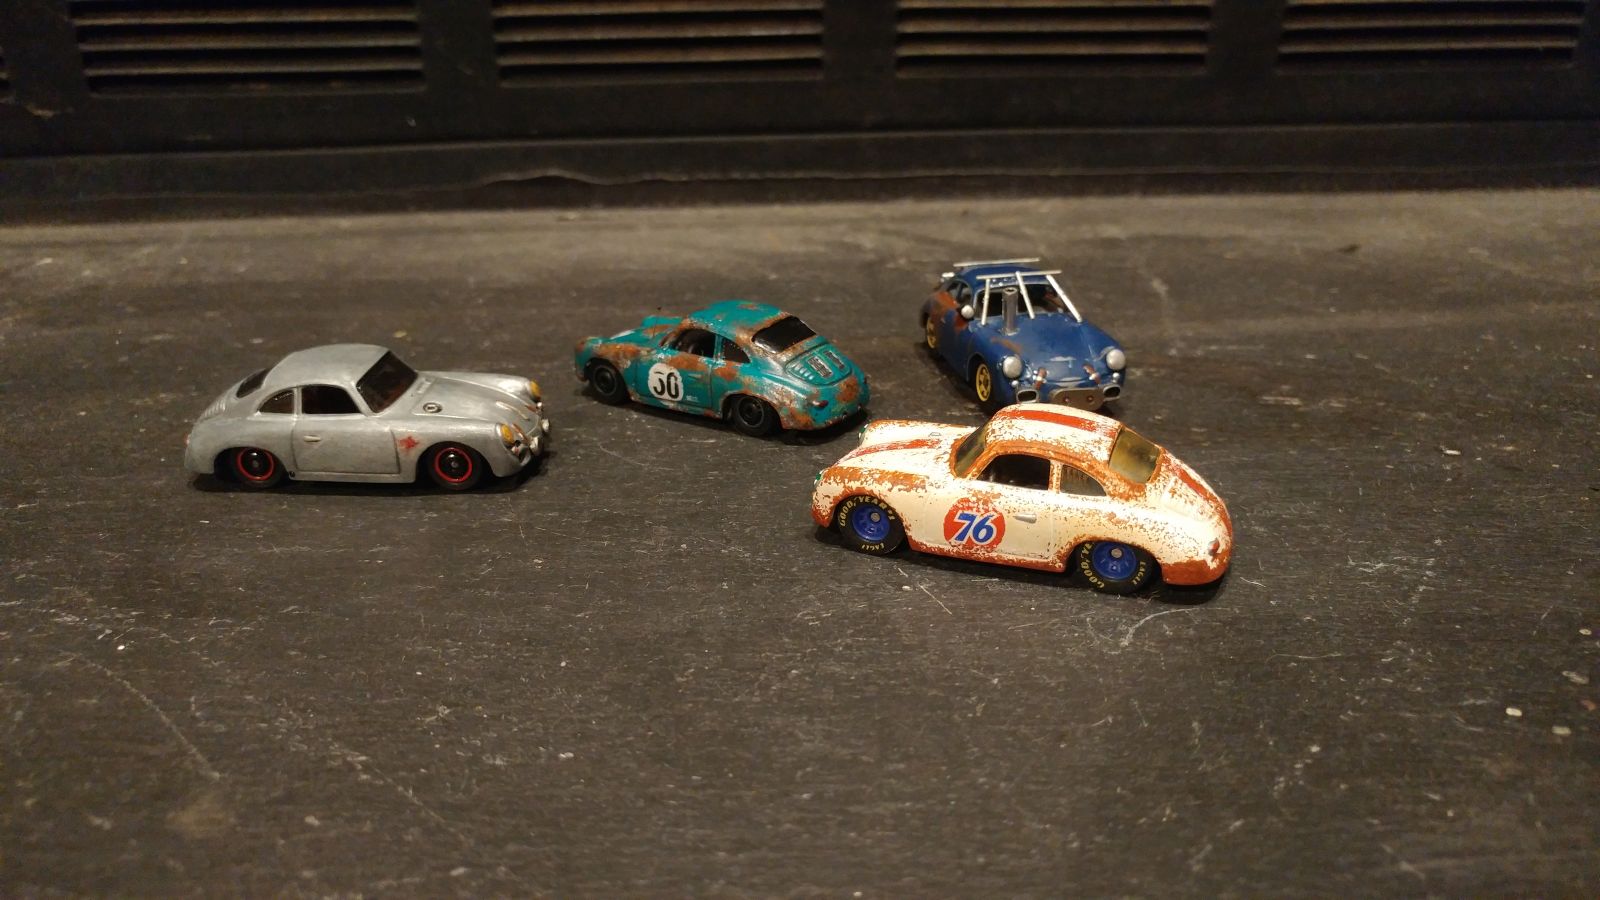 Alongside some of my other dirty 356s.